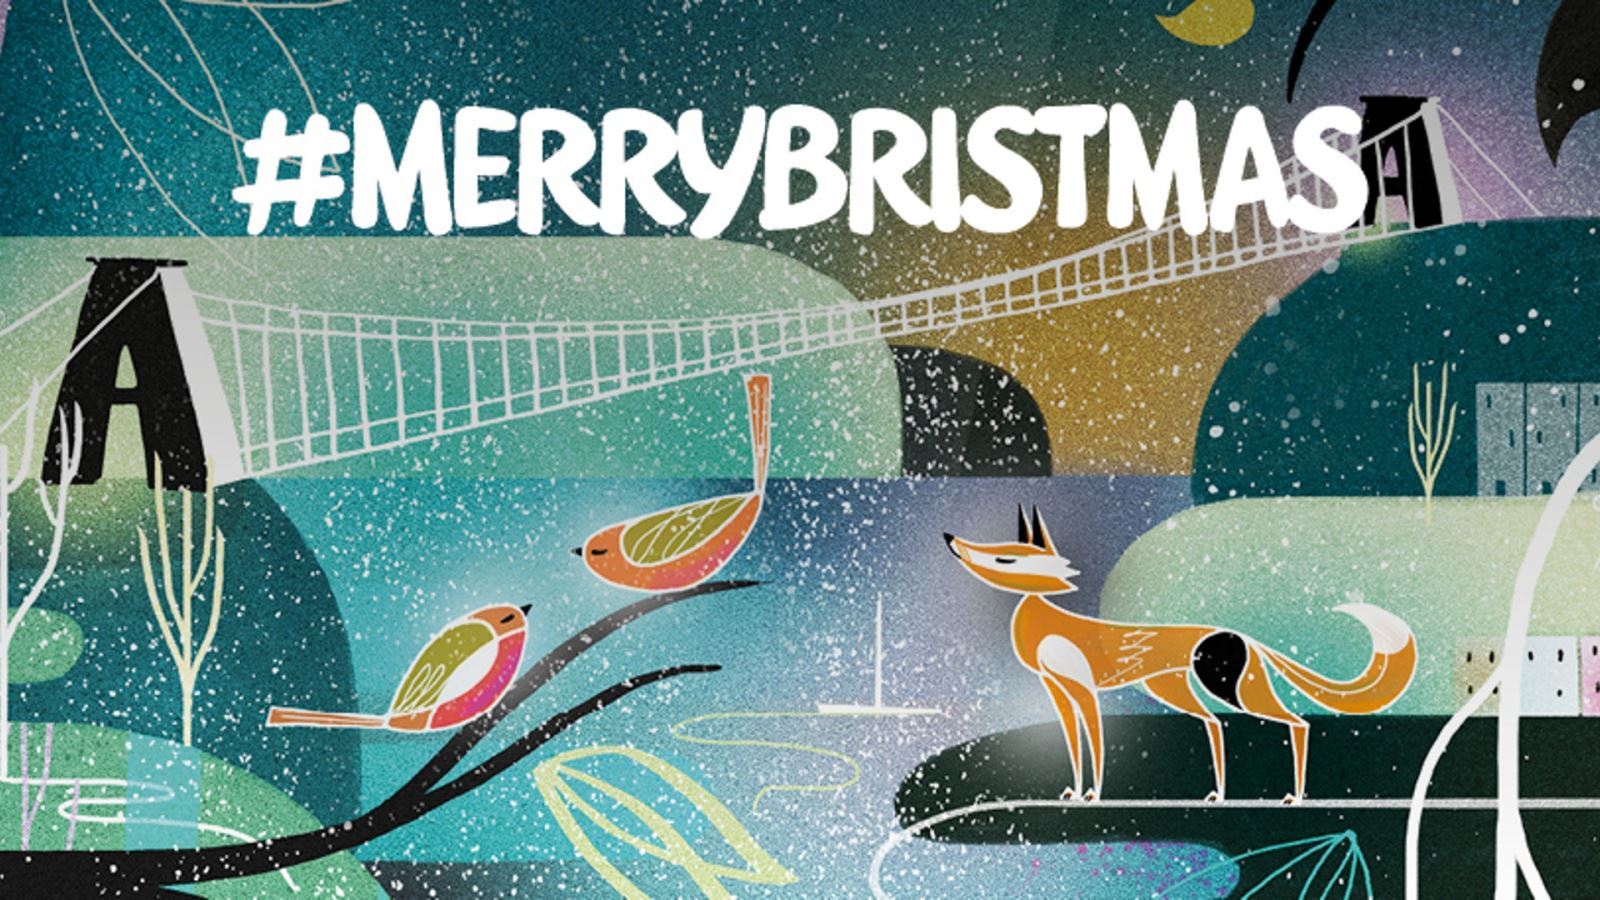 Bex Glover's artwork for #MerryBristmas 2021 campaign